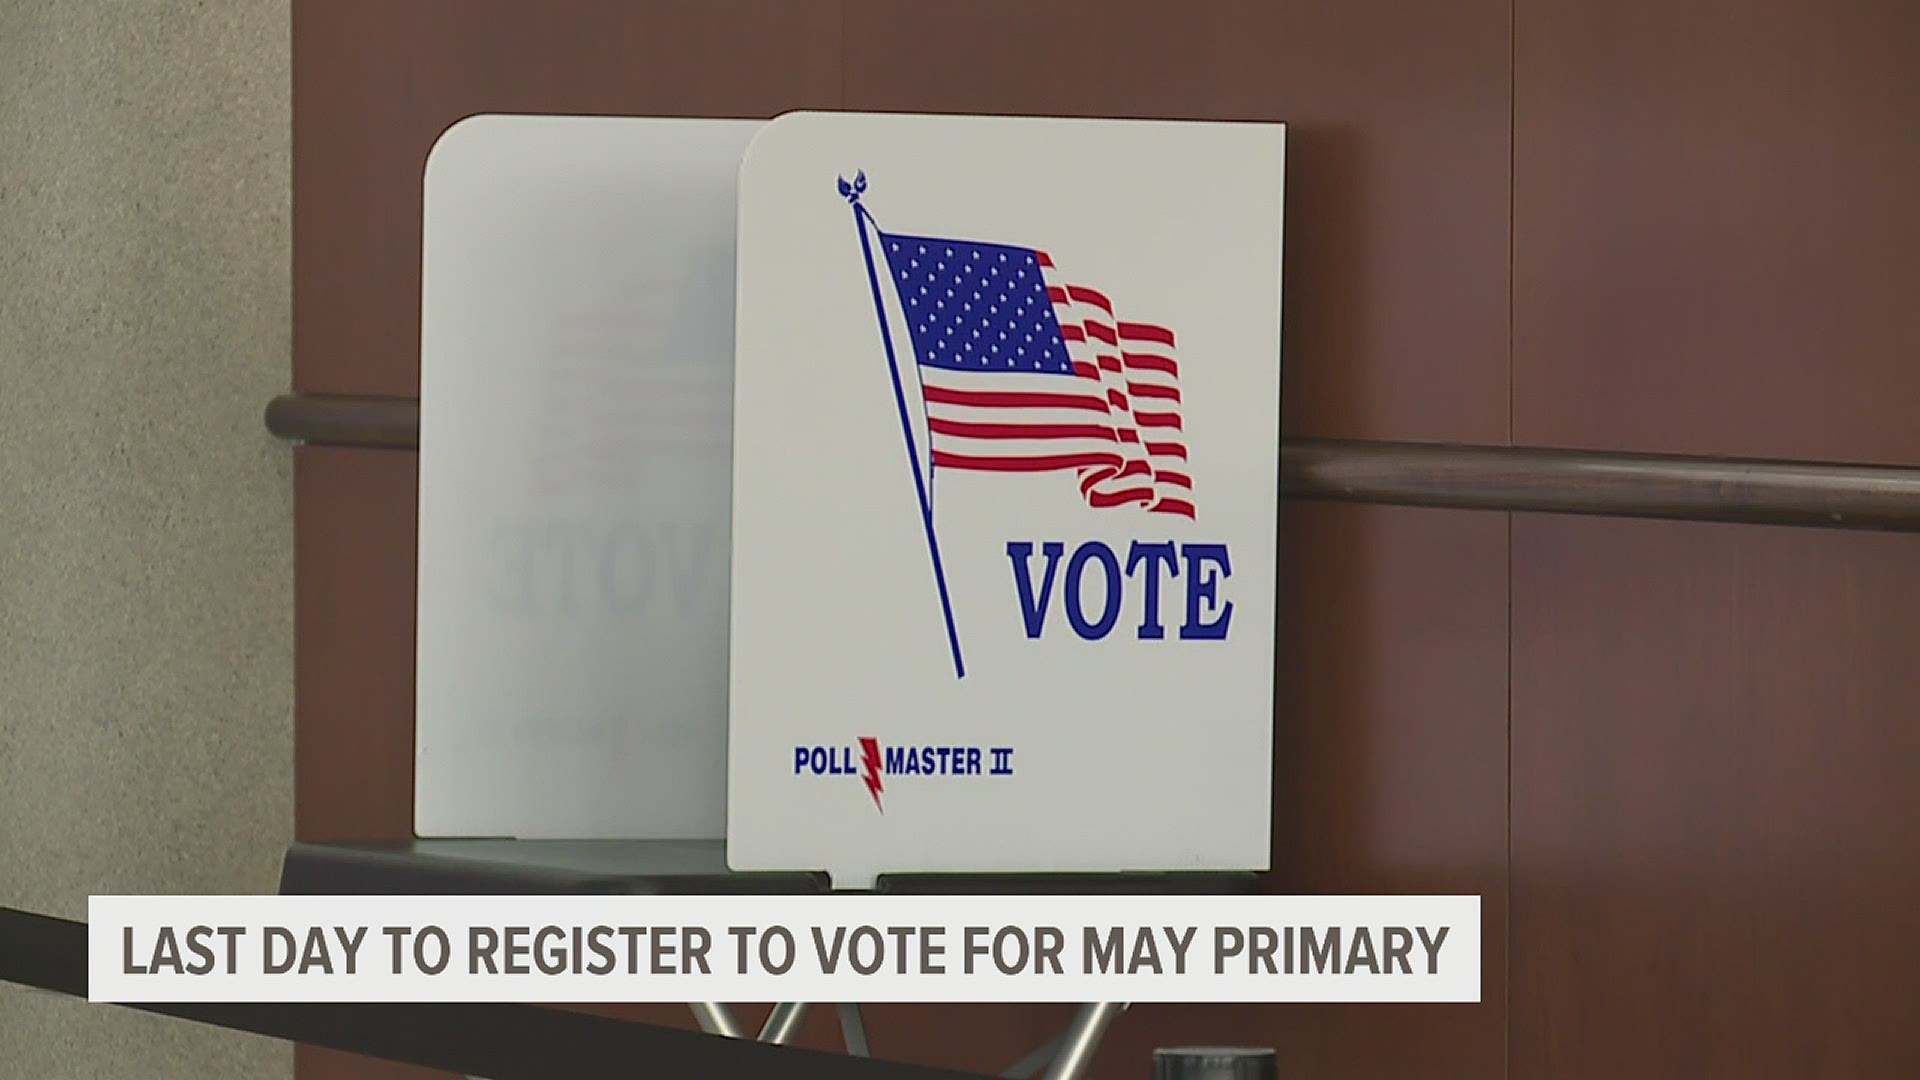 Acting Secretary of State Veronica Degraffenreid said, “I encourage all eligible voters to make sure that they are registered, and their information is up to date."